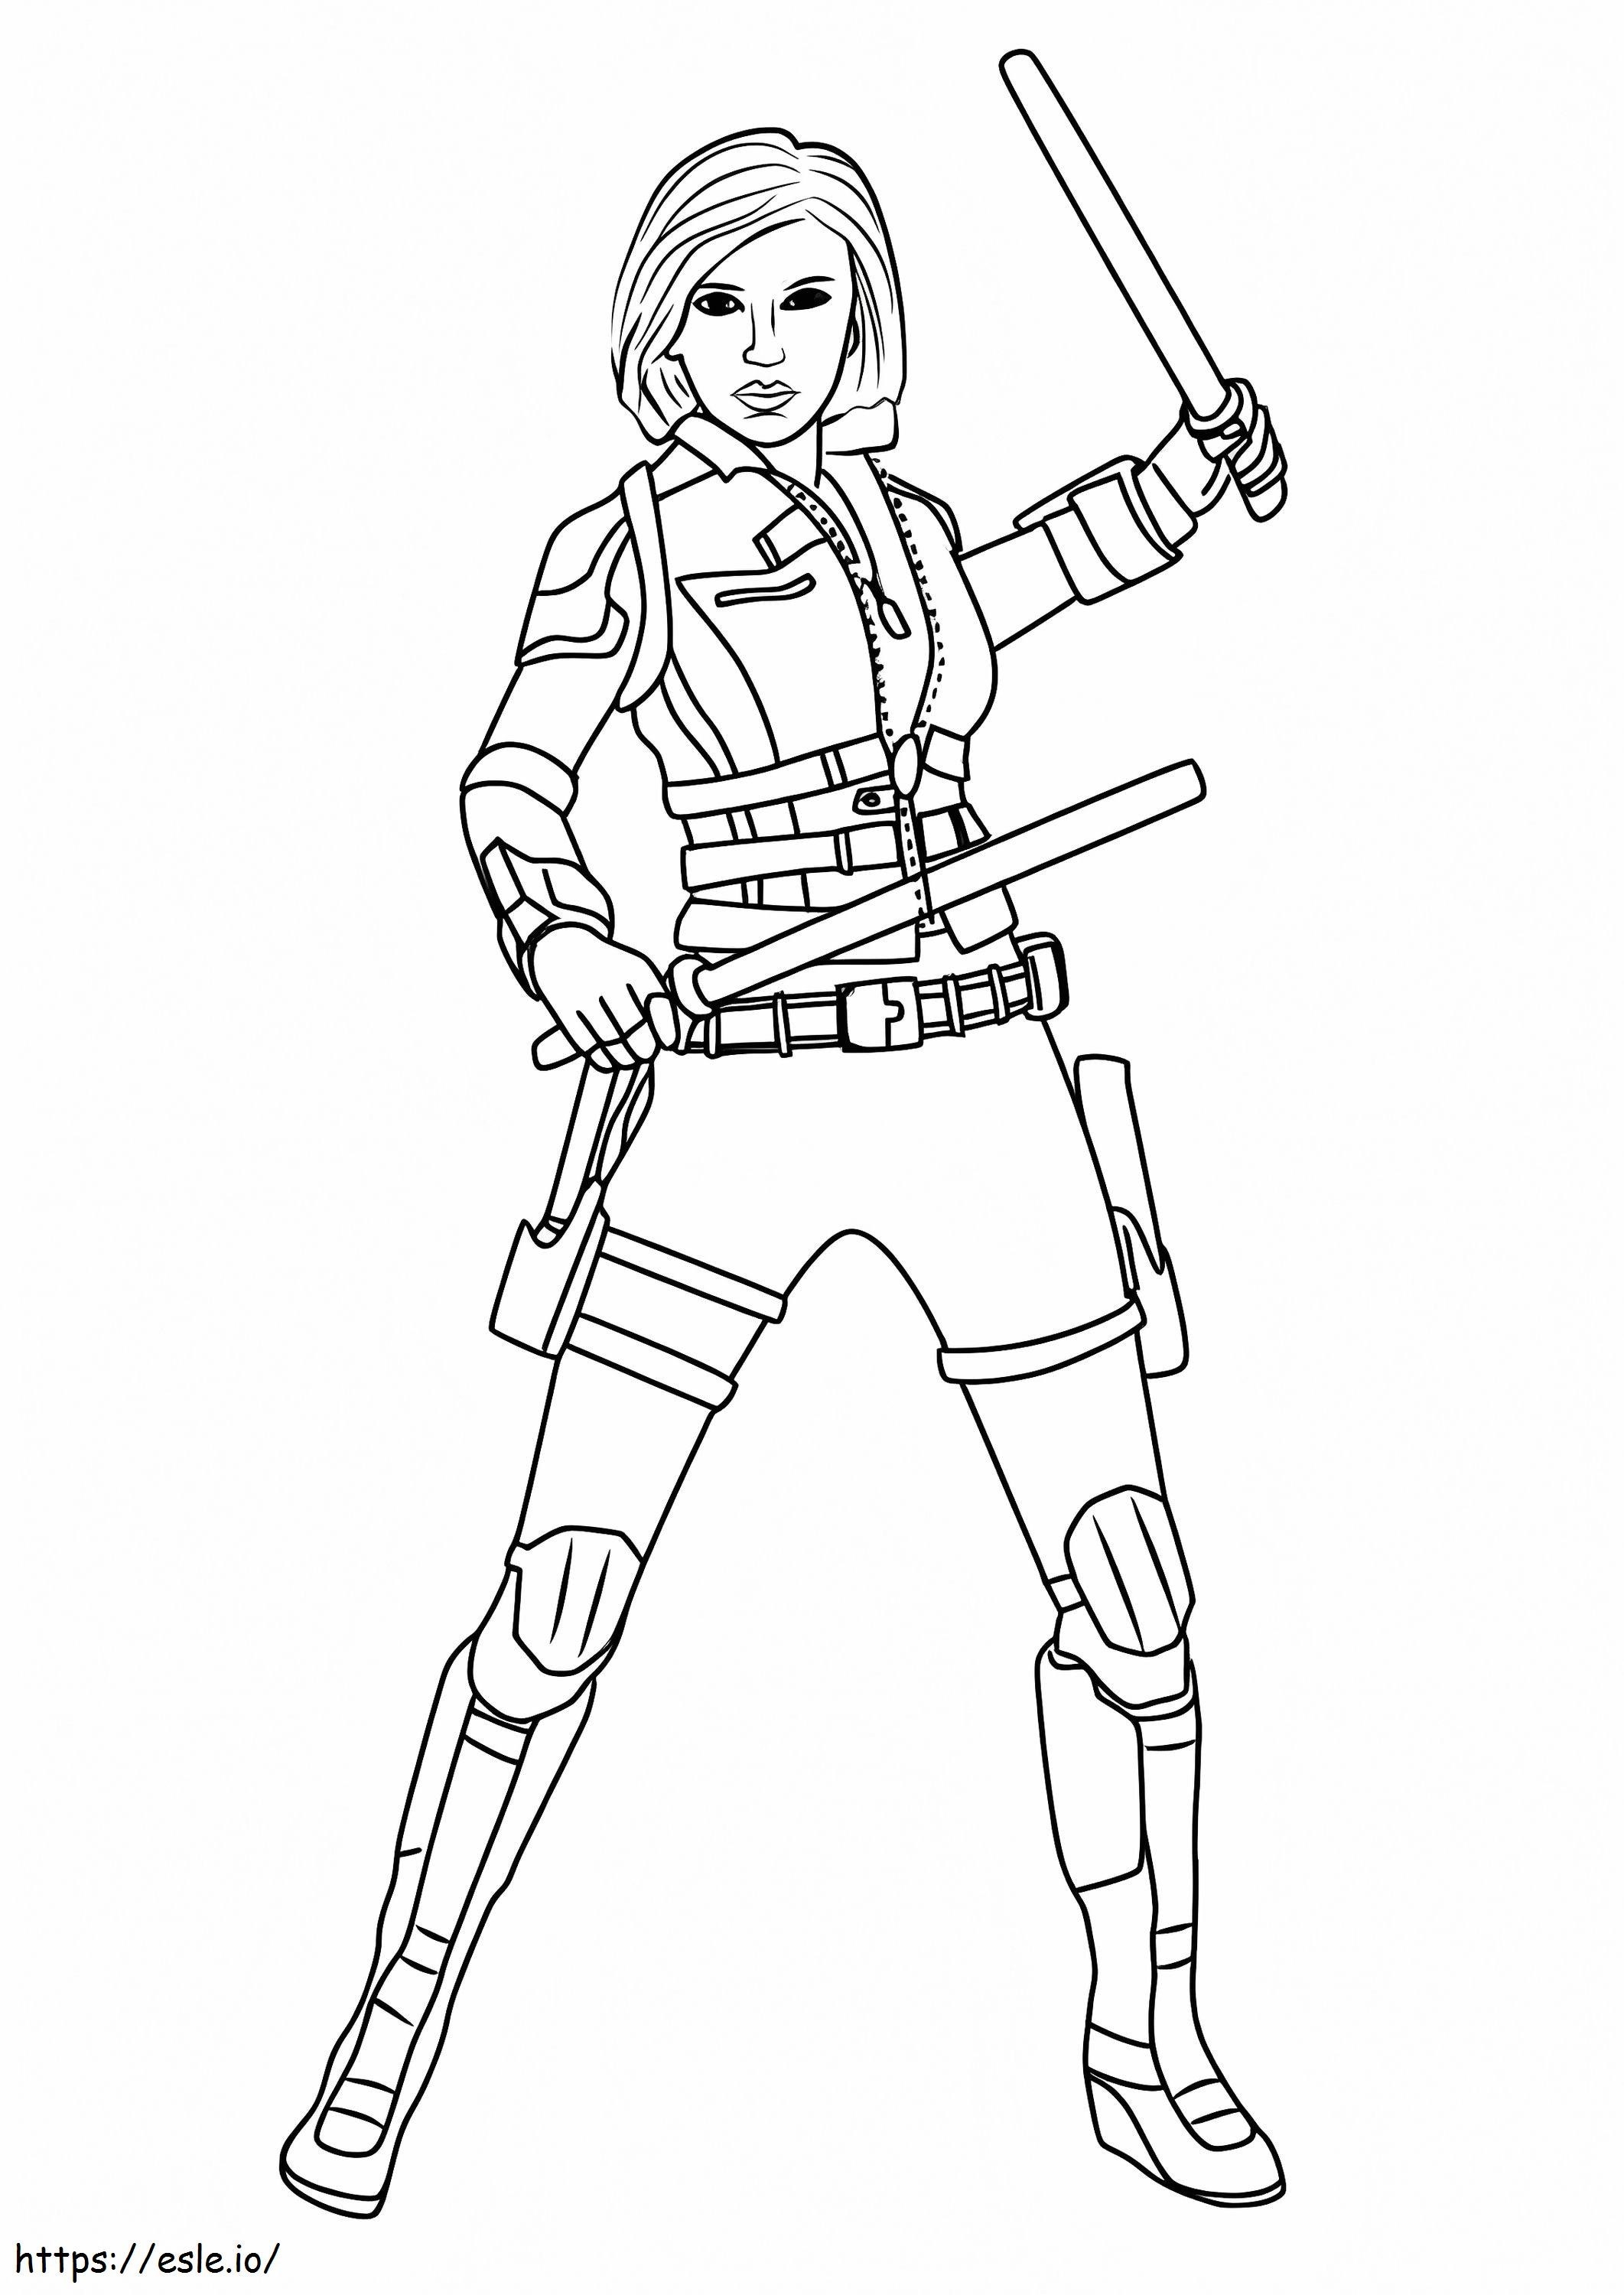 Black Widow Holding Two Sticks coloring page